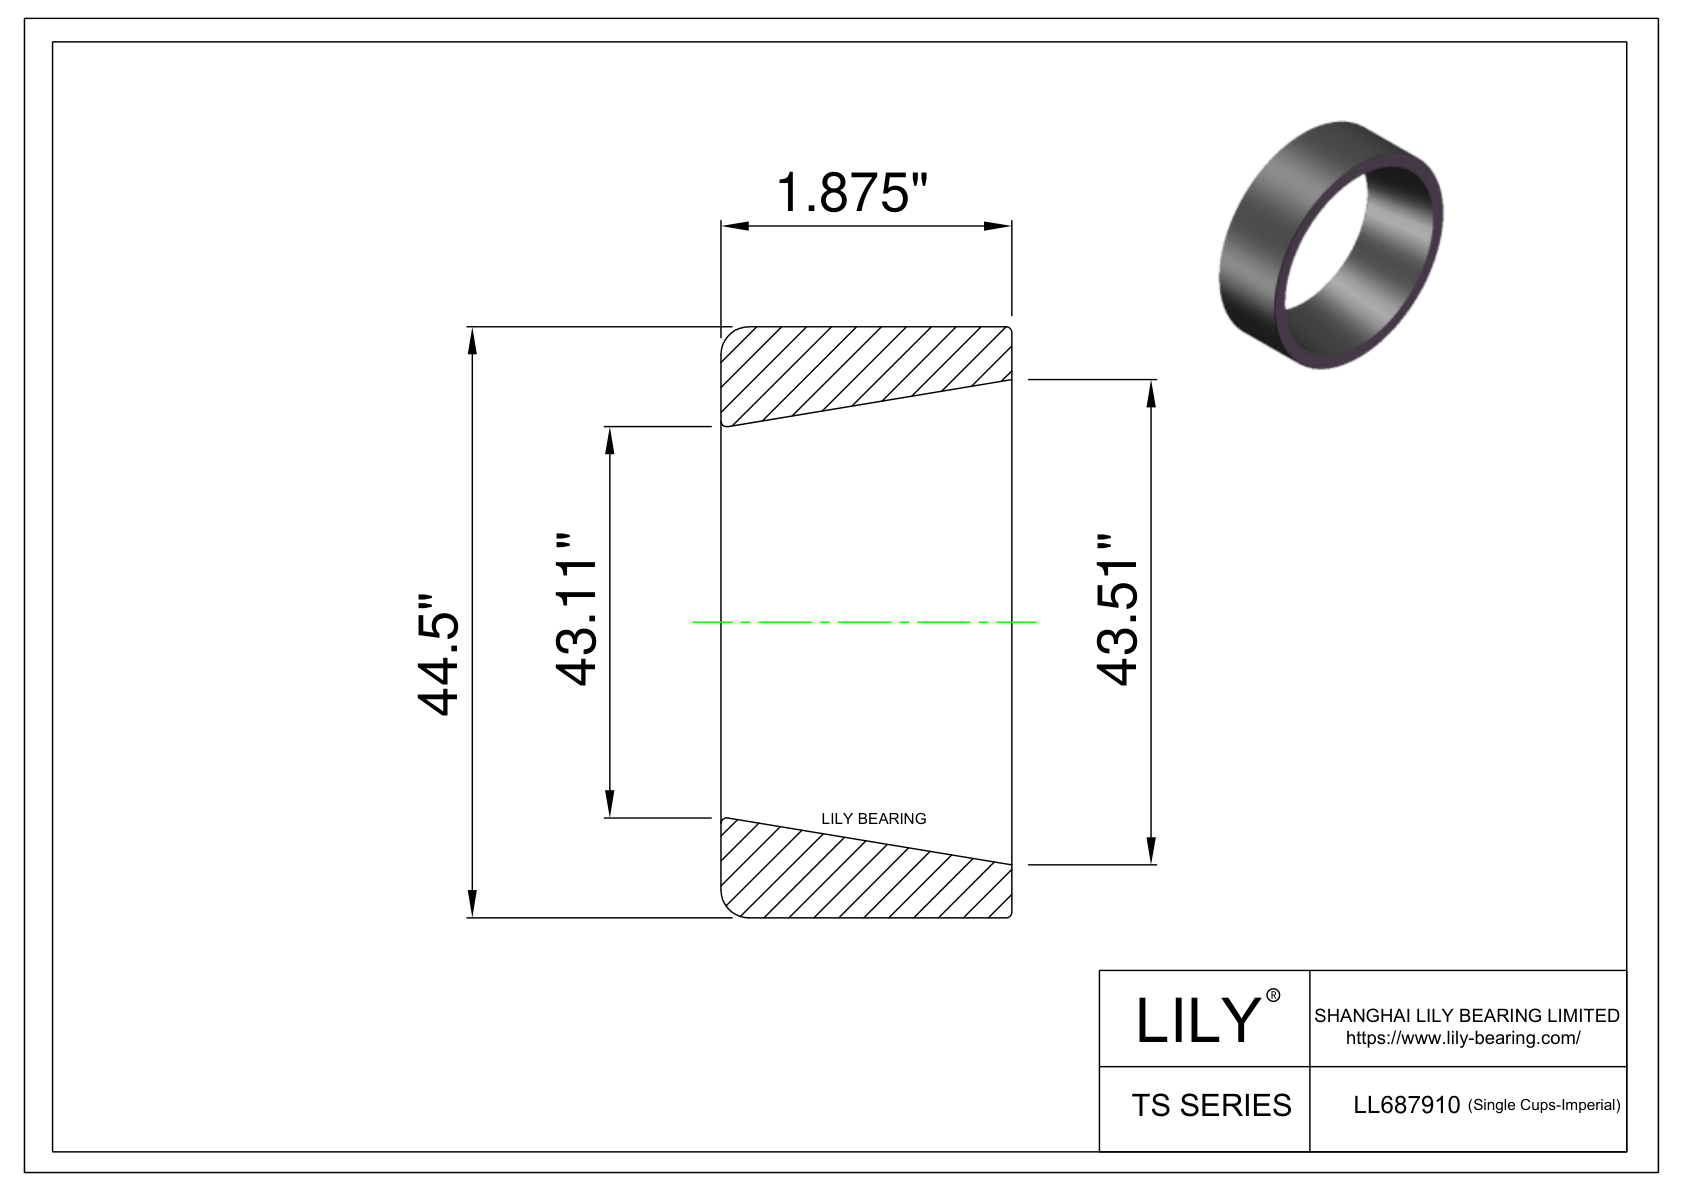 LL687910 Single Cups (Imperial) cad drawing